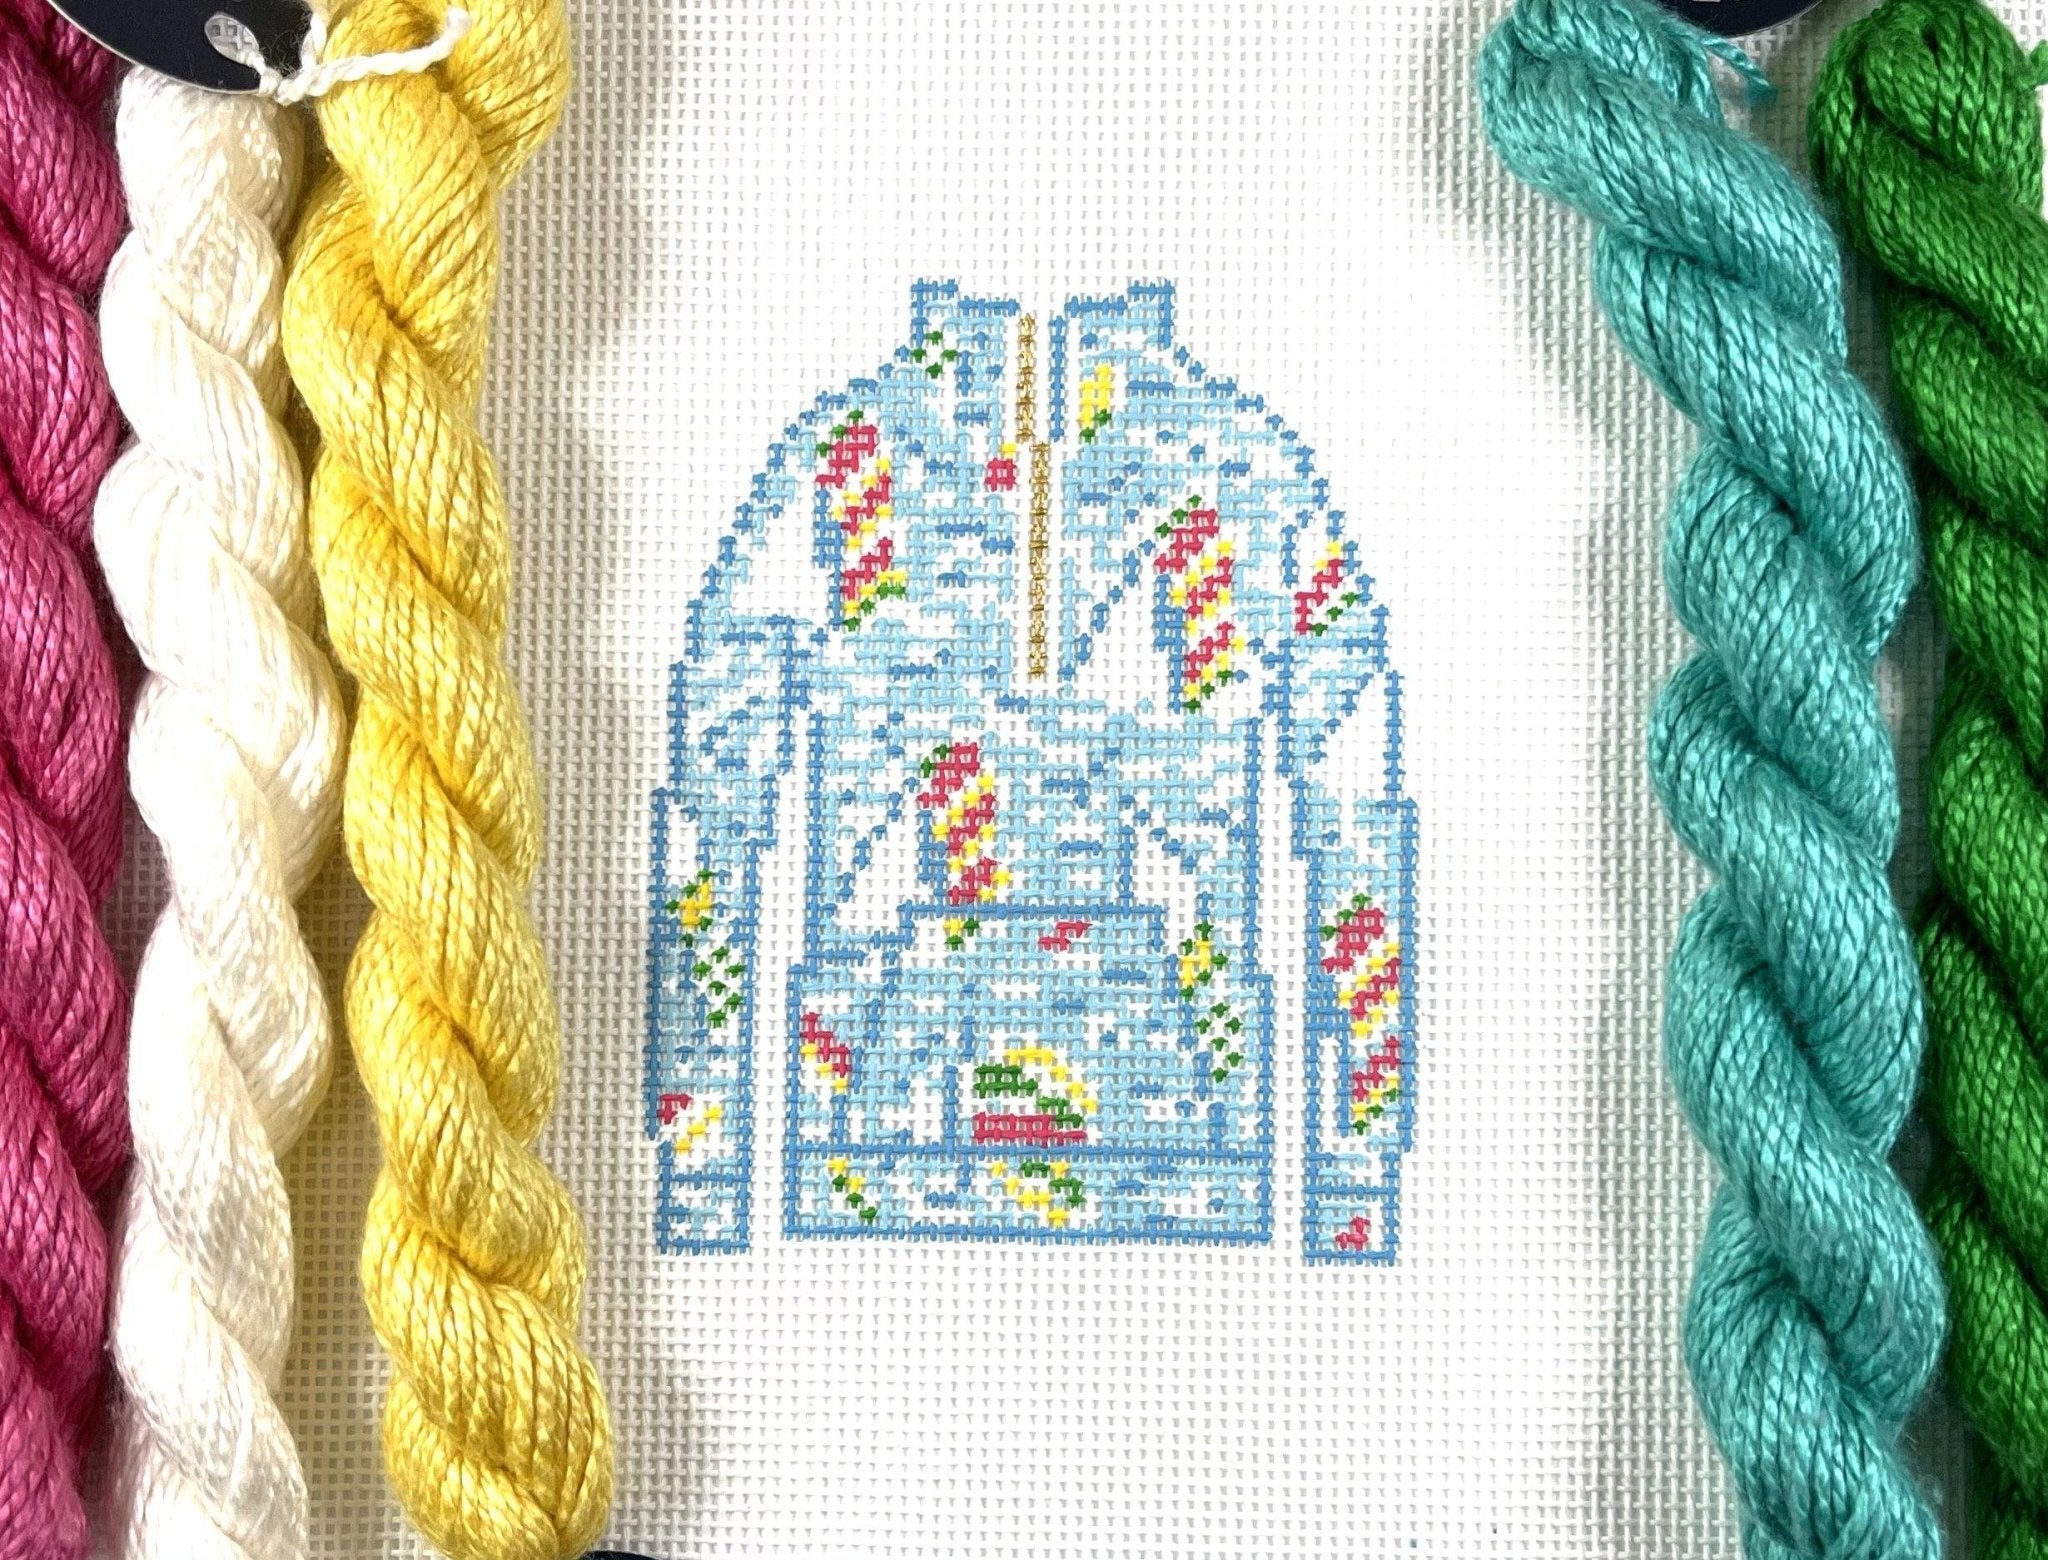 Popover- Sailboats - Needlepoint by Laura